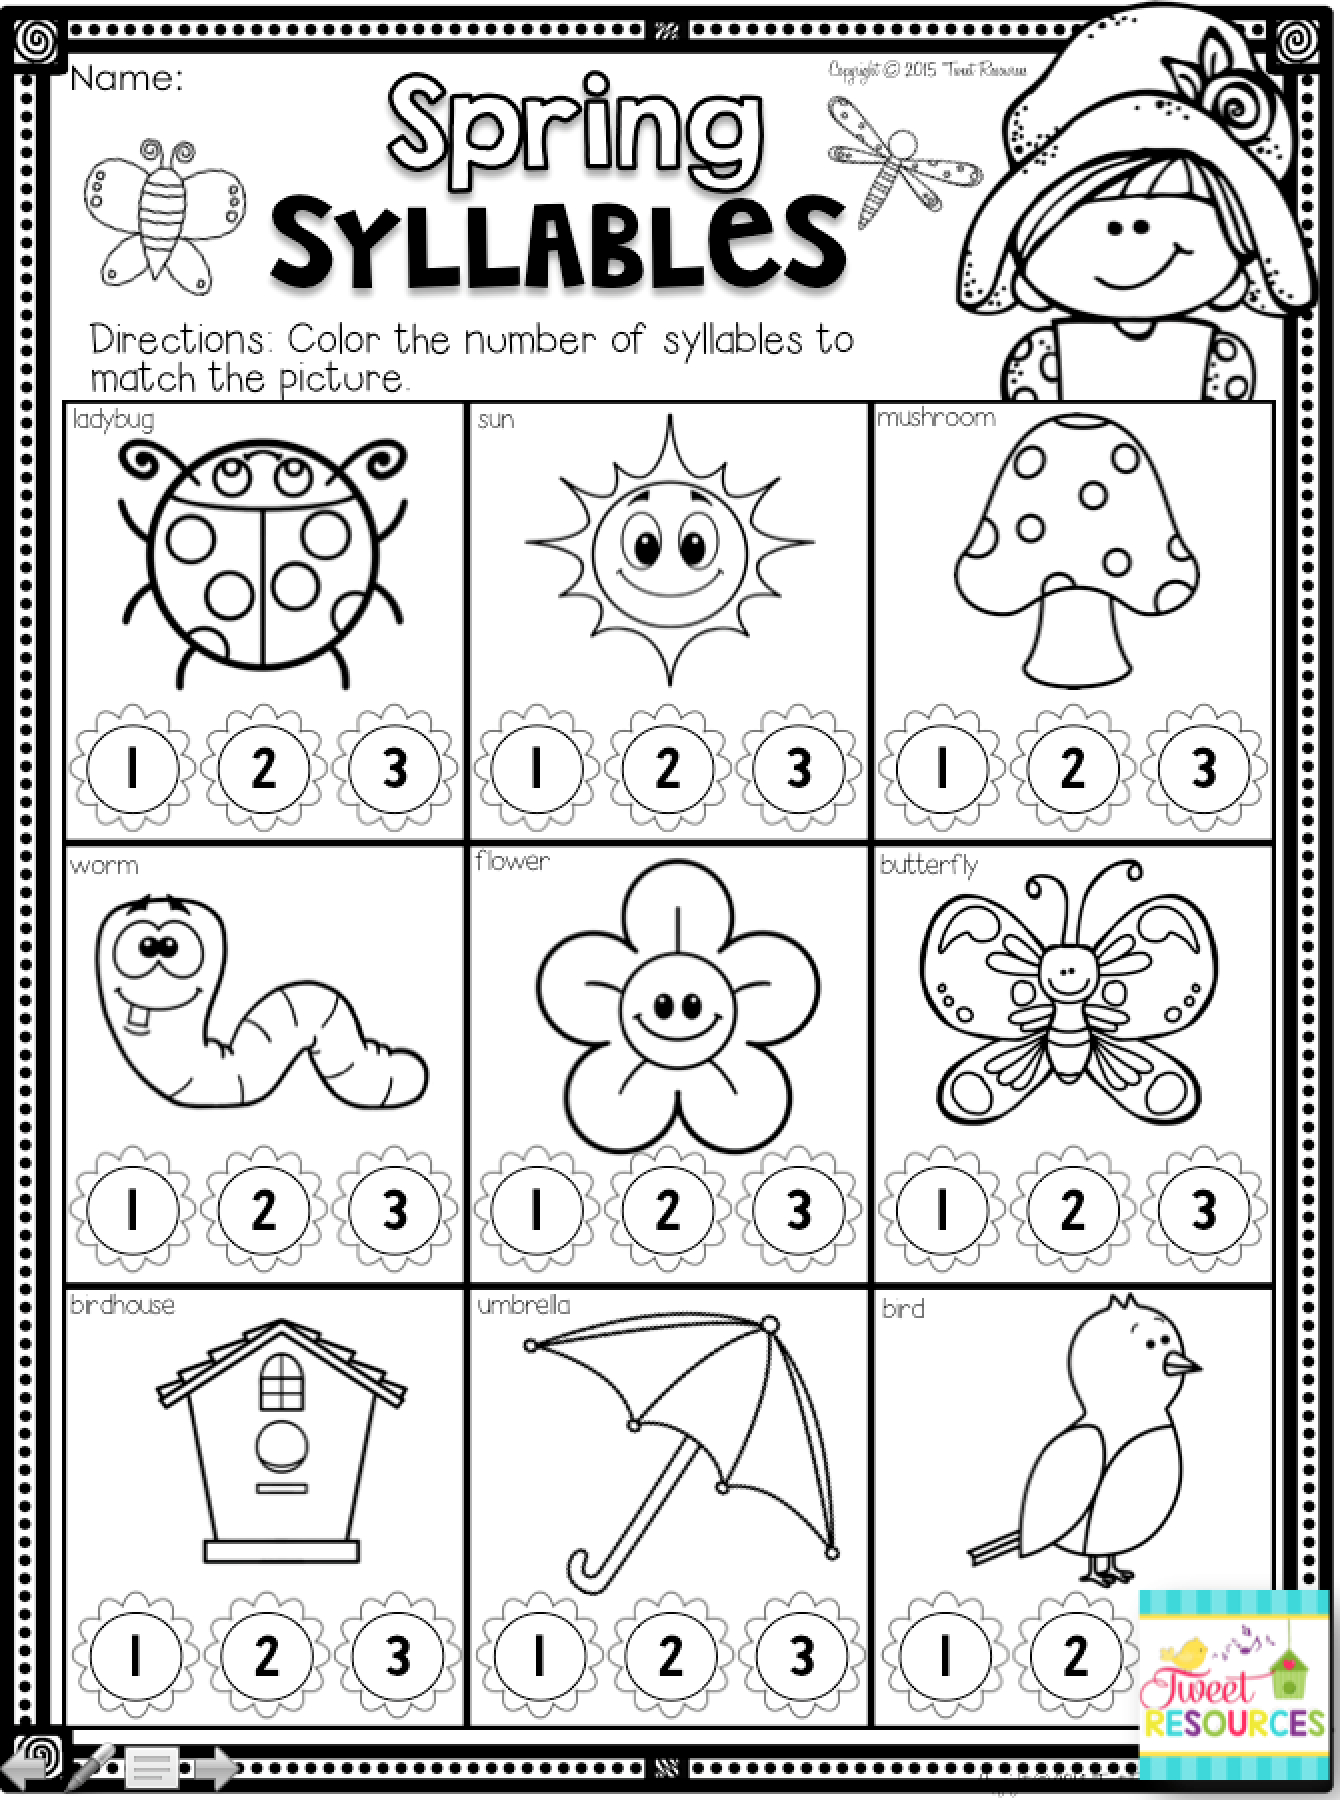 Kindergarten Math And Literacy Printables For Spring! Spring | Spring Printable Worksheets For Preschoolers